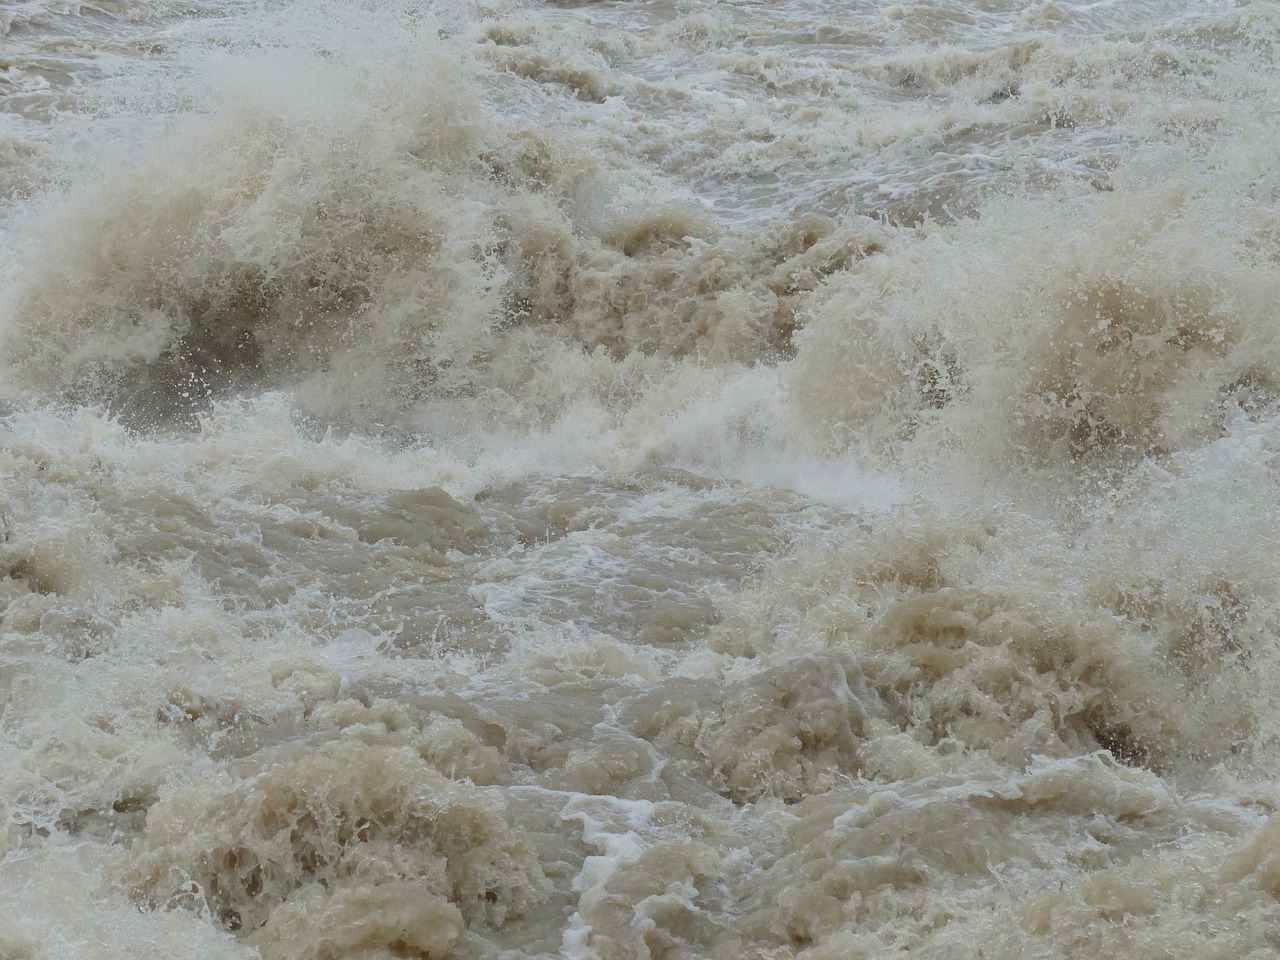 a man riding a wave on top of a surfboard, a picture, shutterstock, hurufiyya, floor flooded, thunderstorm in marrakech, detailed zoom photo, in an african river